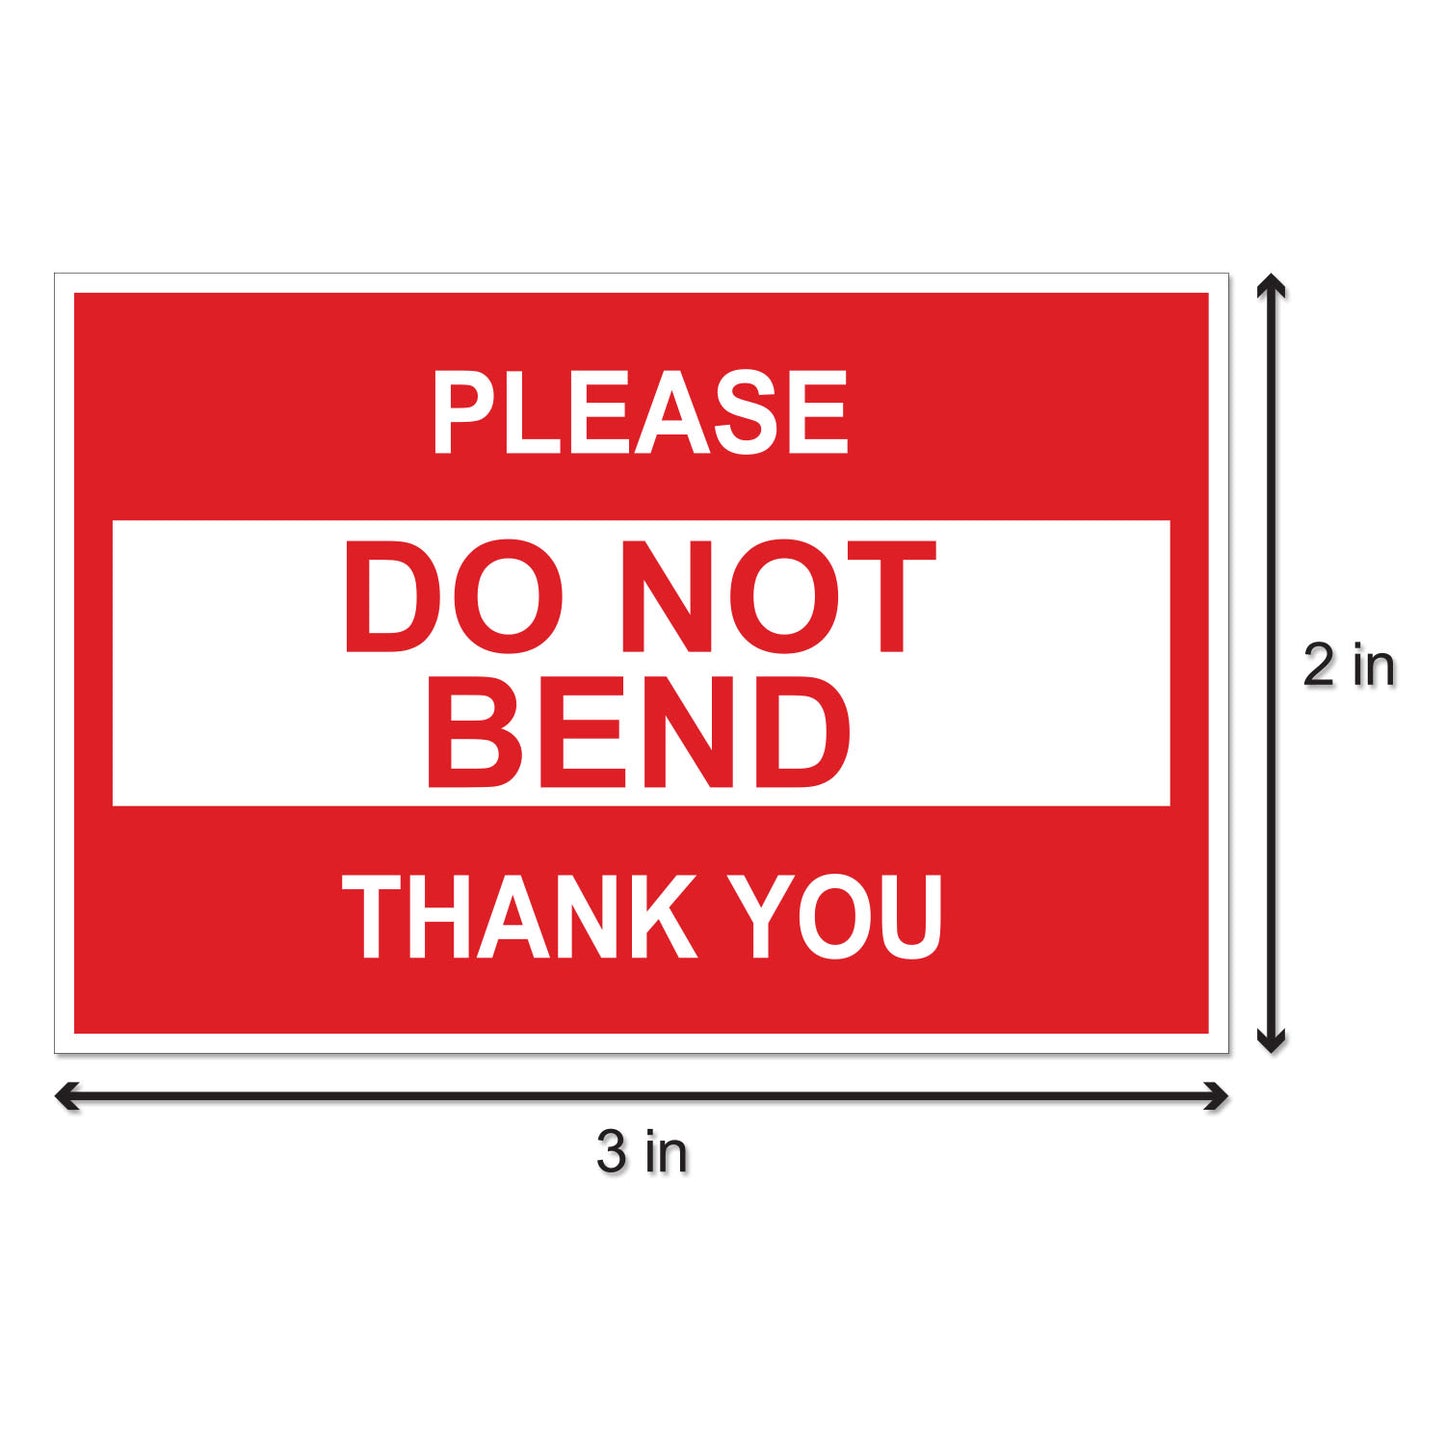 3 x 2 inch | Shipping & Handling: Please, Do Not Bend Stickers